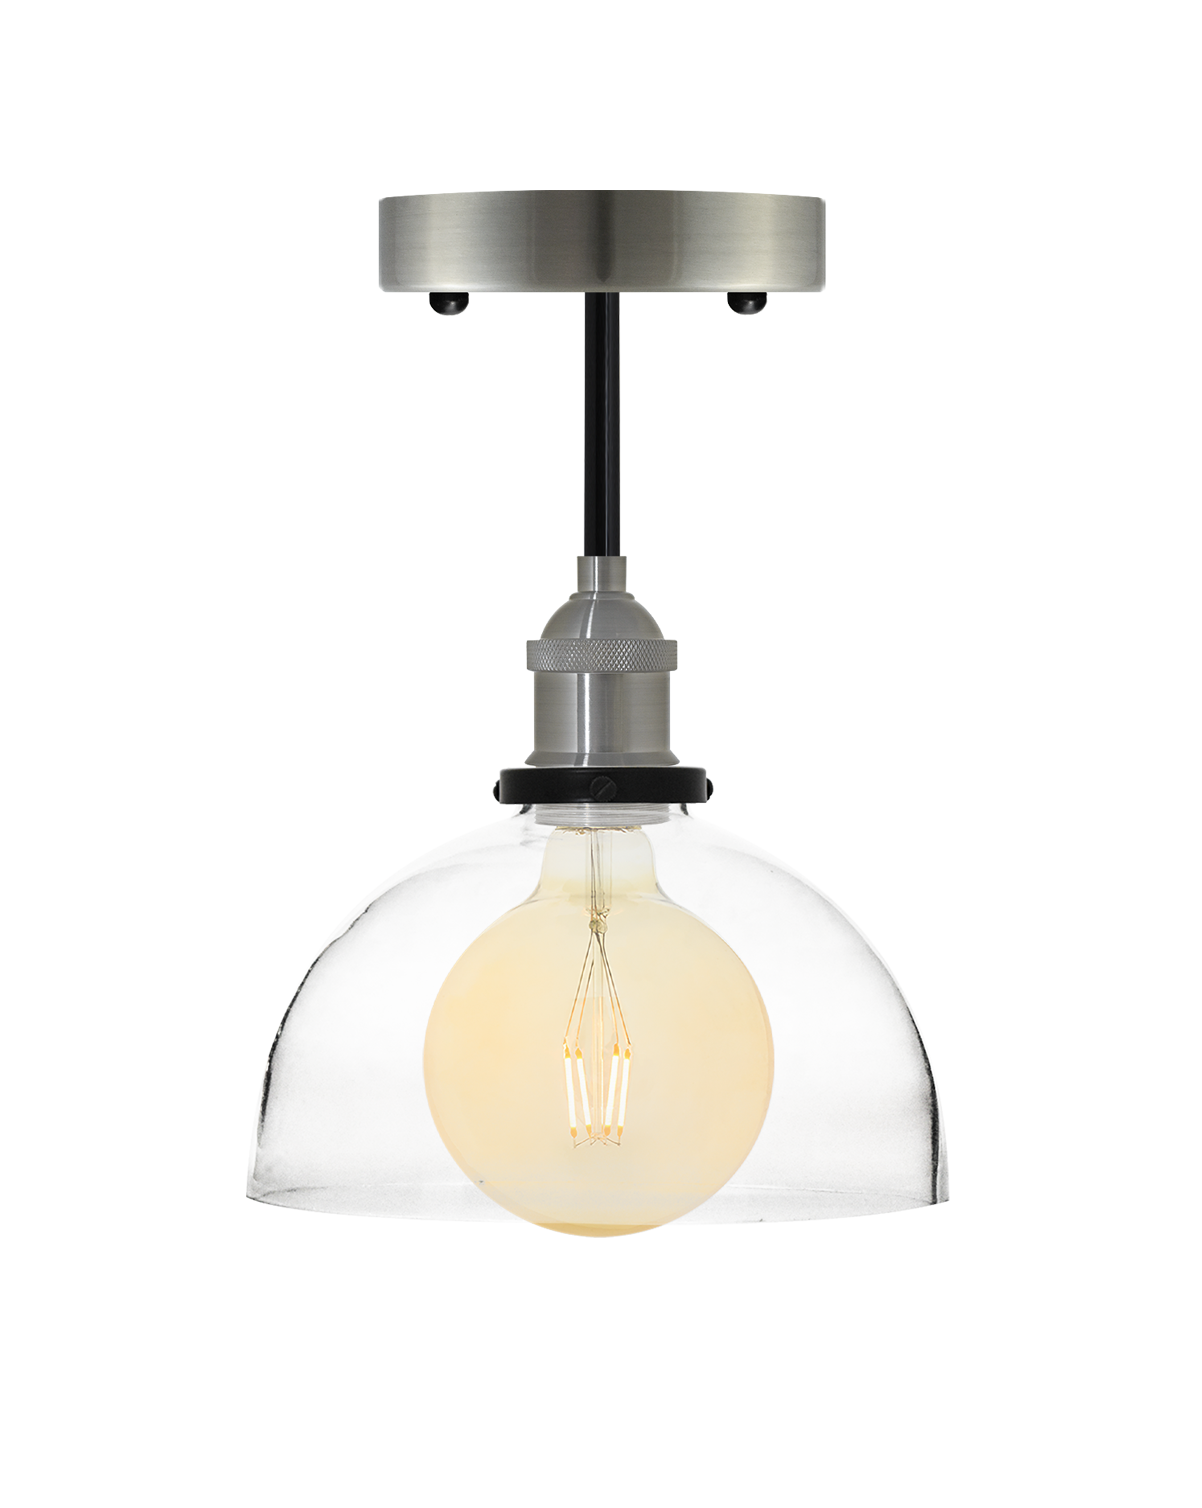 Semi-flush mount light fixture with a brushed nickel base, a clear glass dome shade, and an exposed bulb.